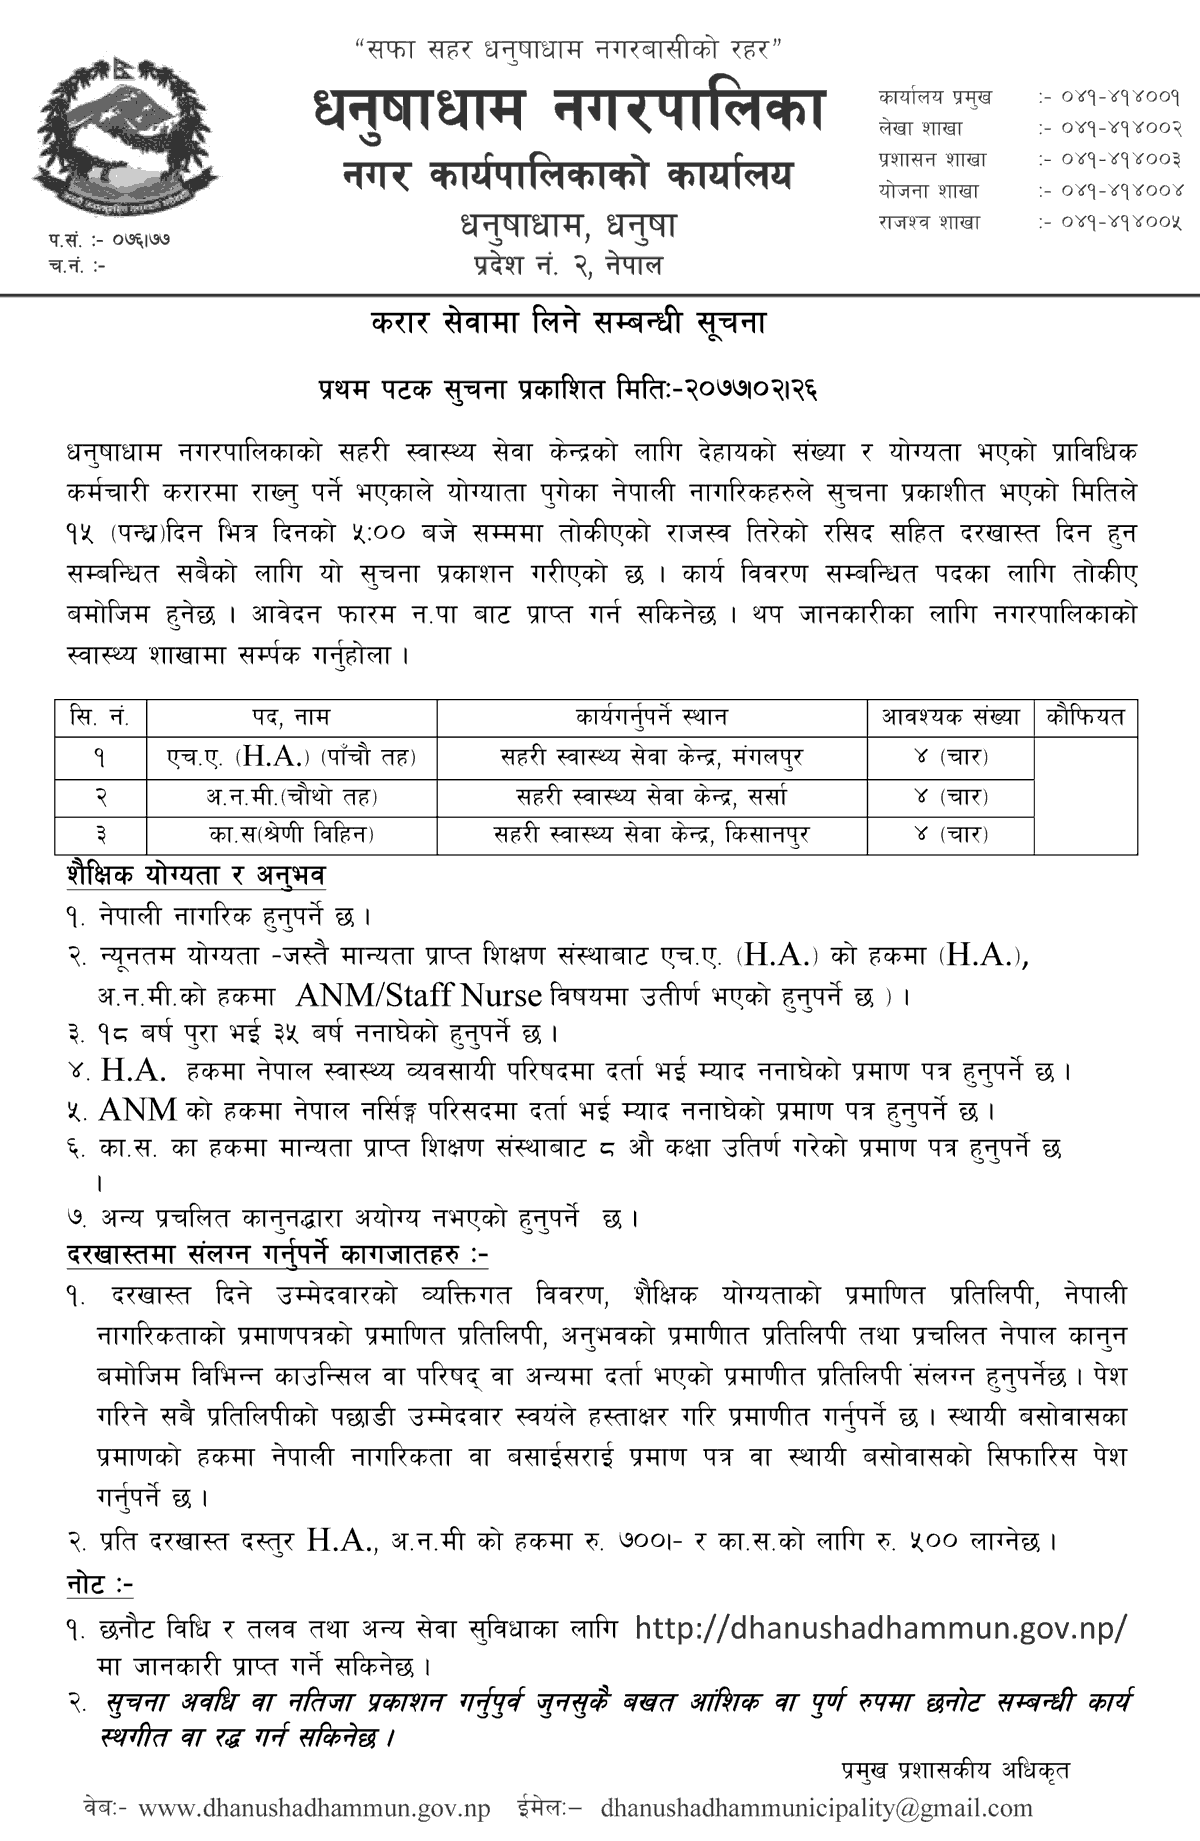 Dhanushadham Municipality Announces Job Vacancy for Health Workers